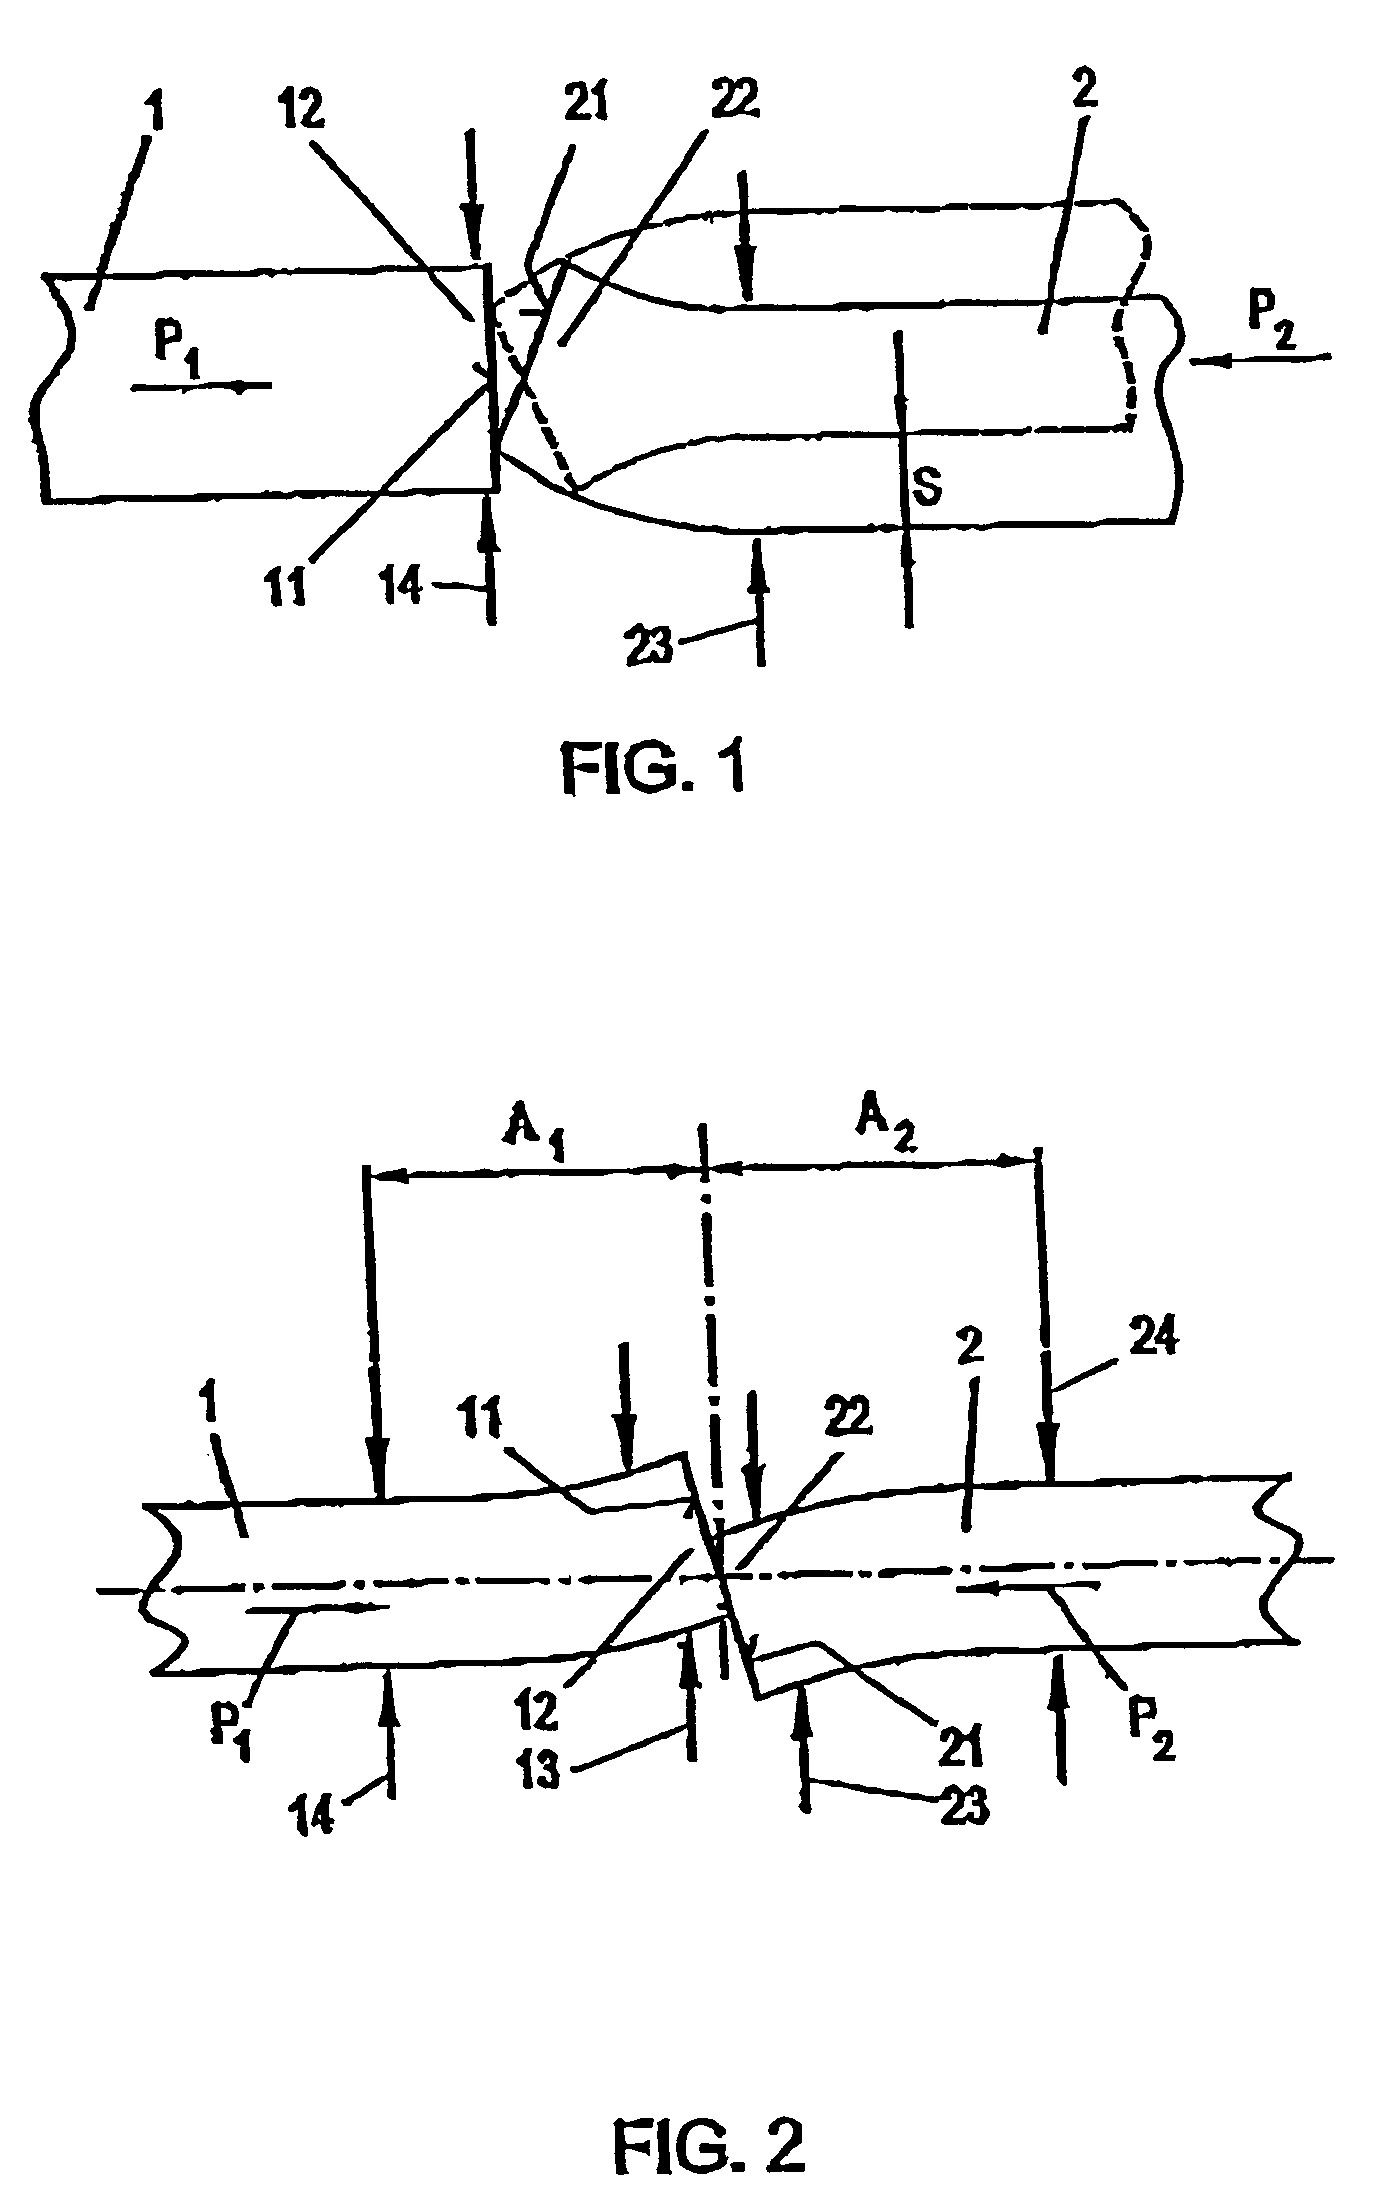 Method for metallically connecting rods by oscillating friction welding